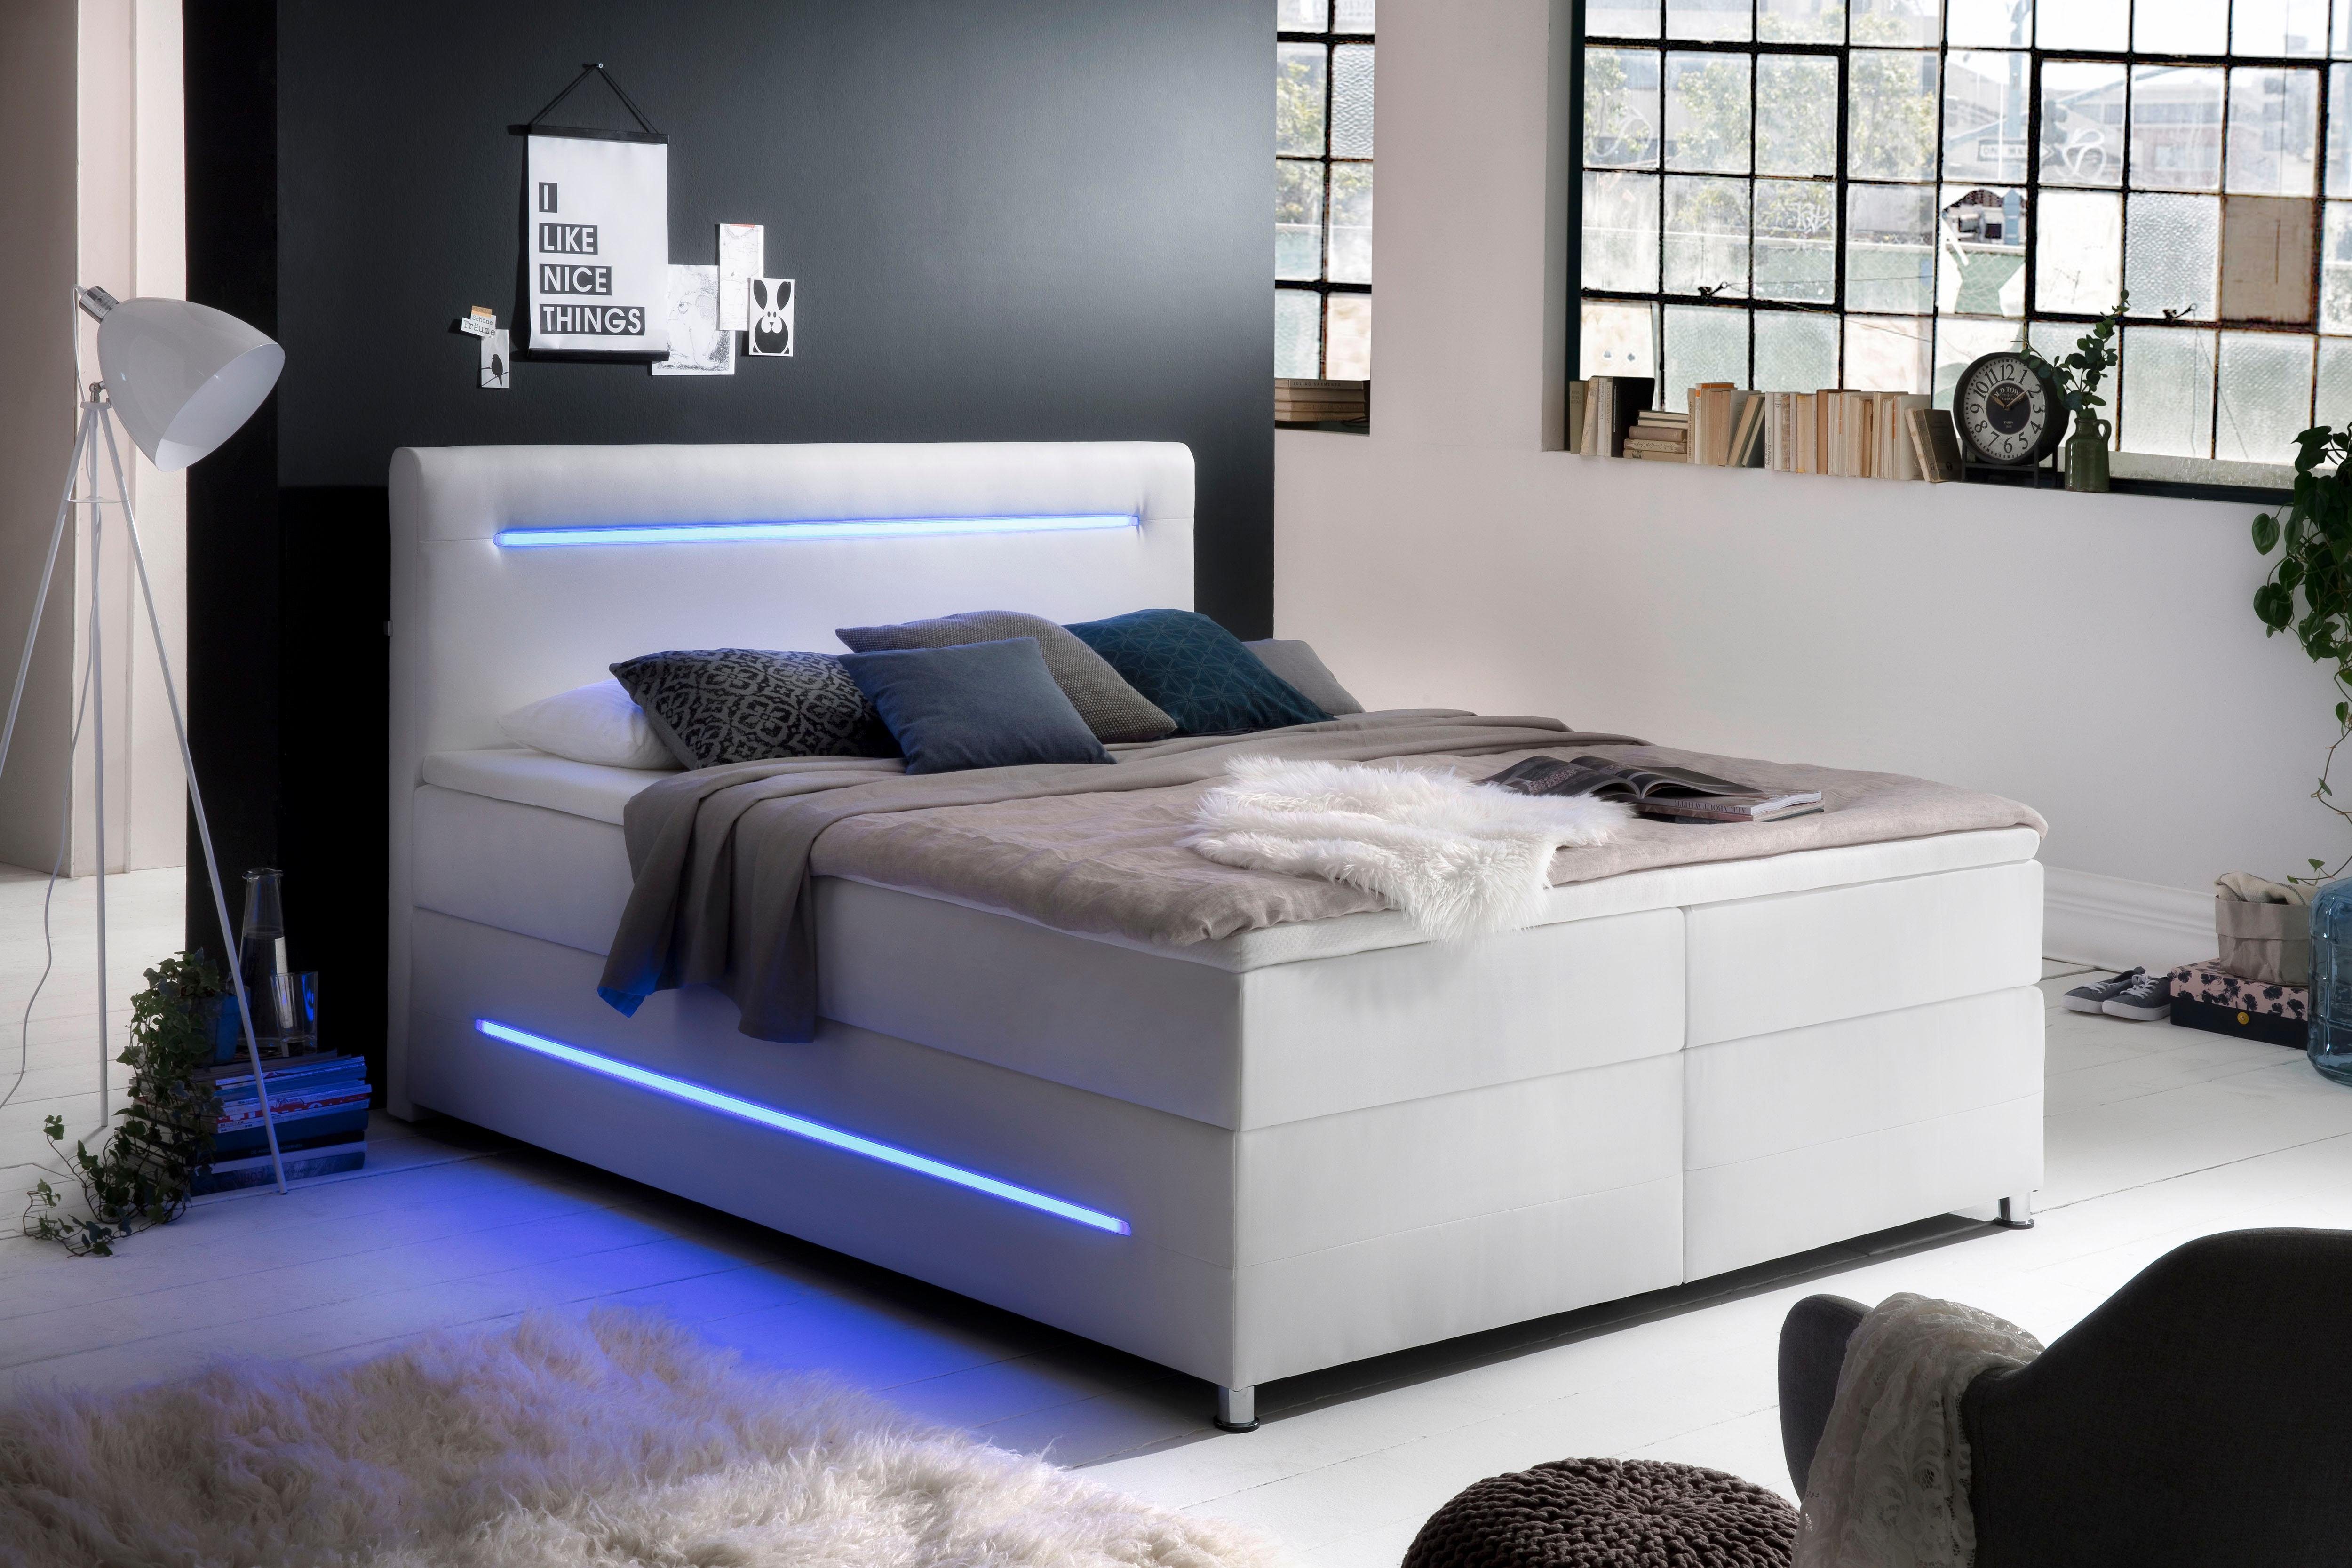 meise.möbel Boxspringbett mit LED Beleuchtung, wahlweise